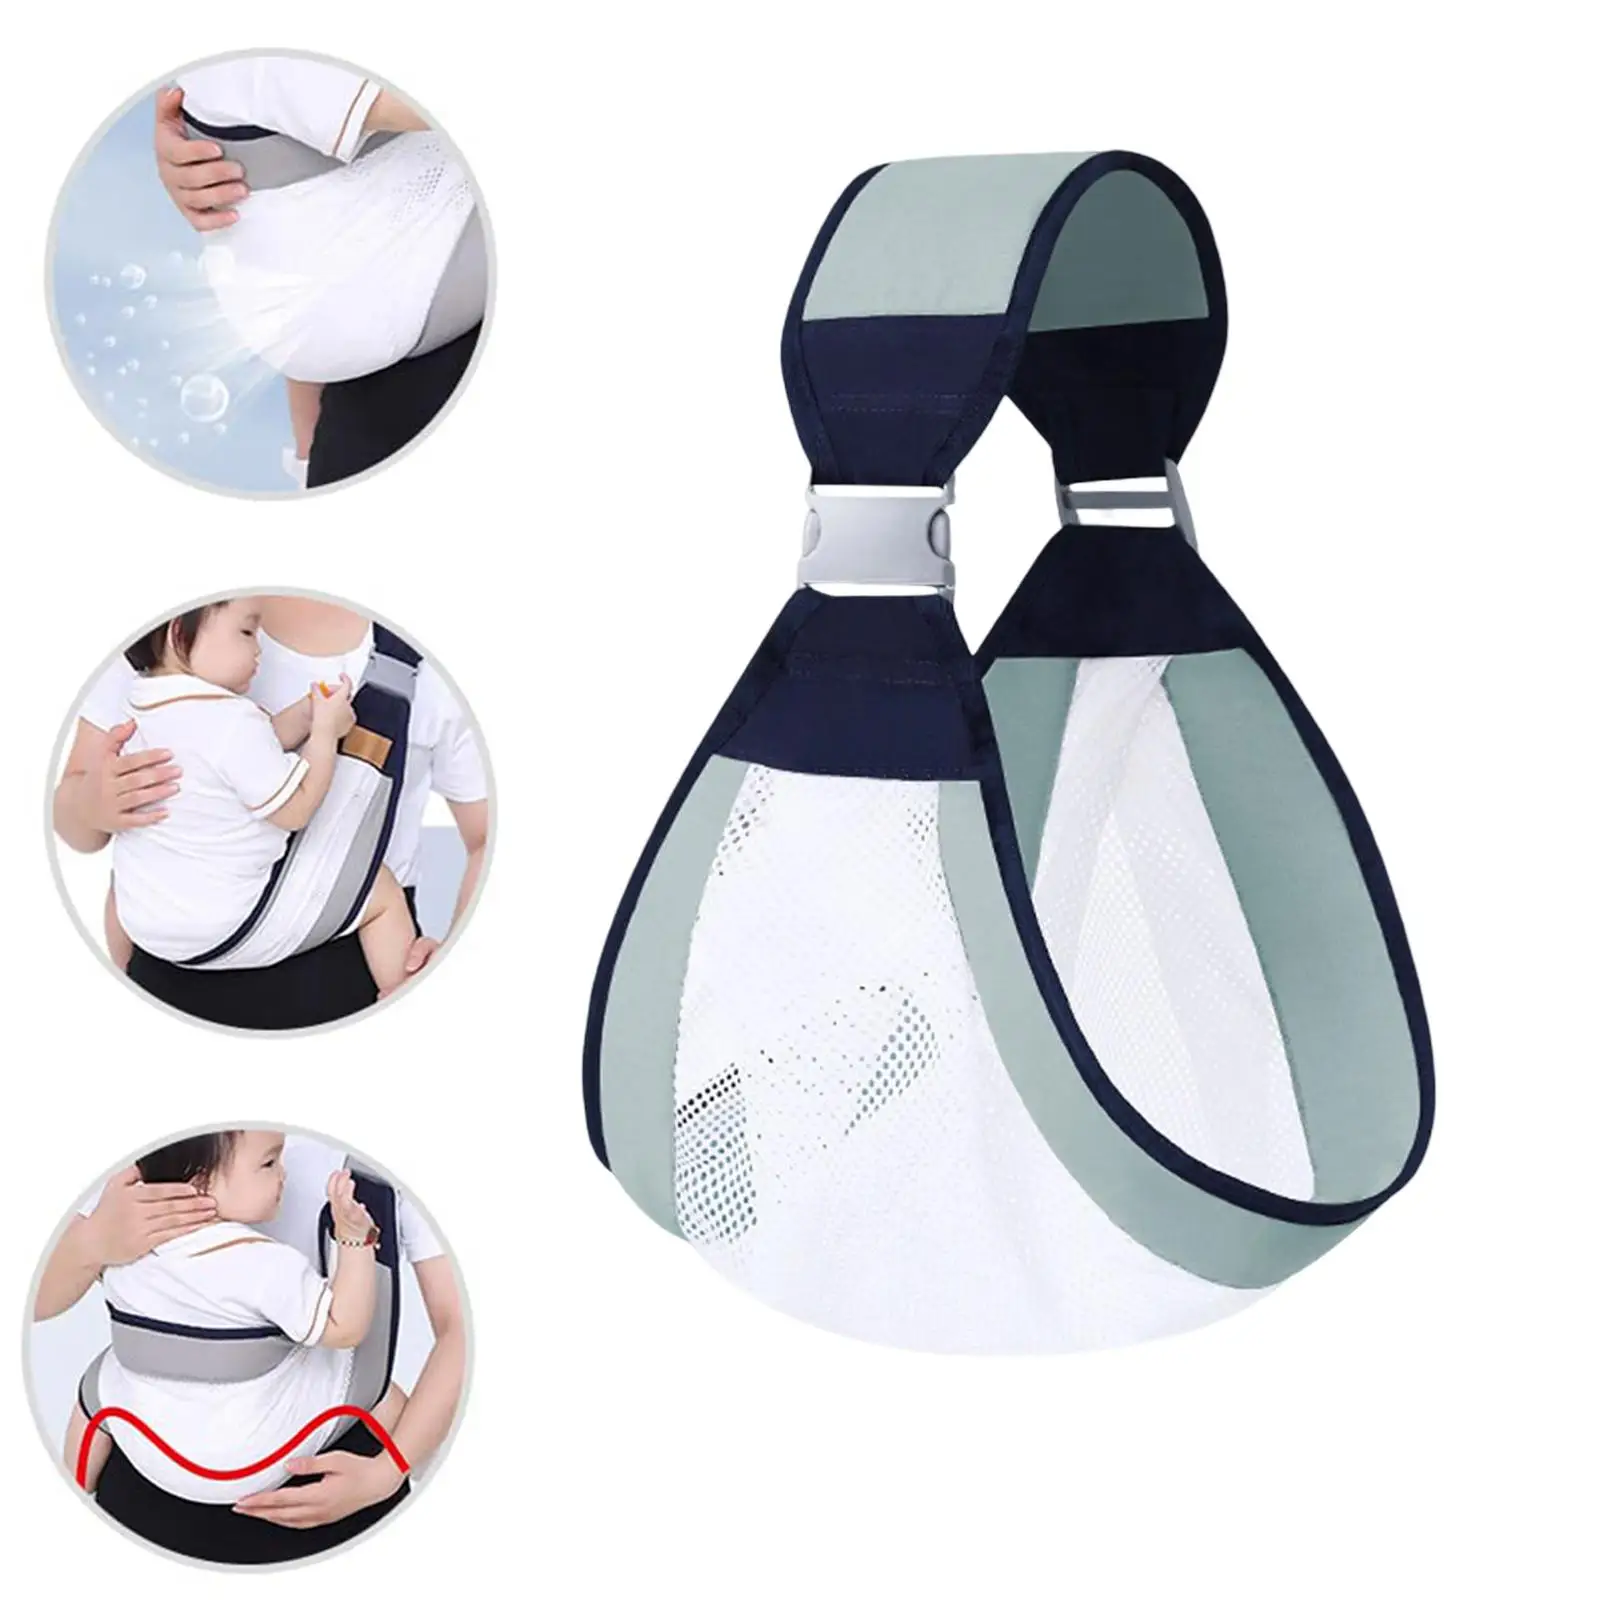 Baby Carrier Adjustable Infant Breastfeeding Nursing Carriers with Clip Baby Holder Straps for Newborn Toddlers up to 20kg